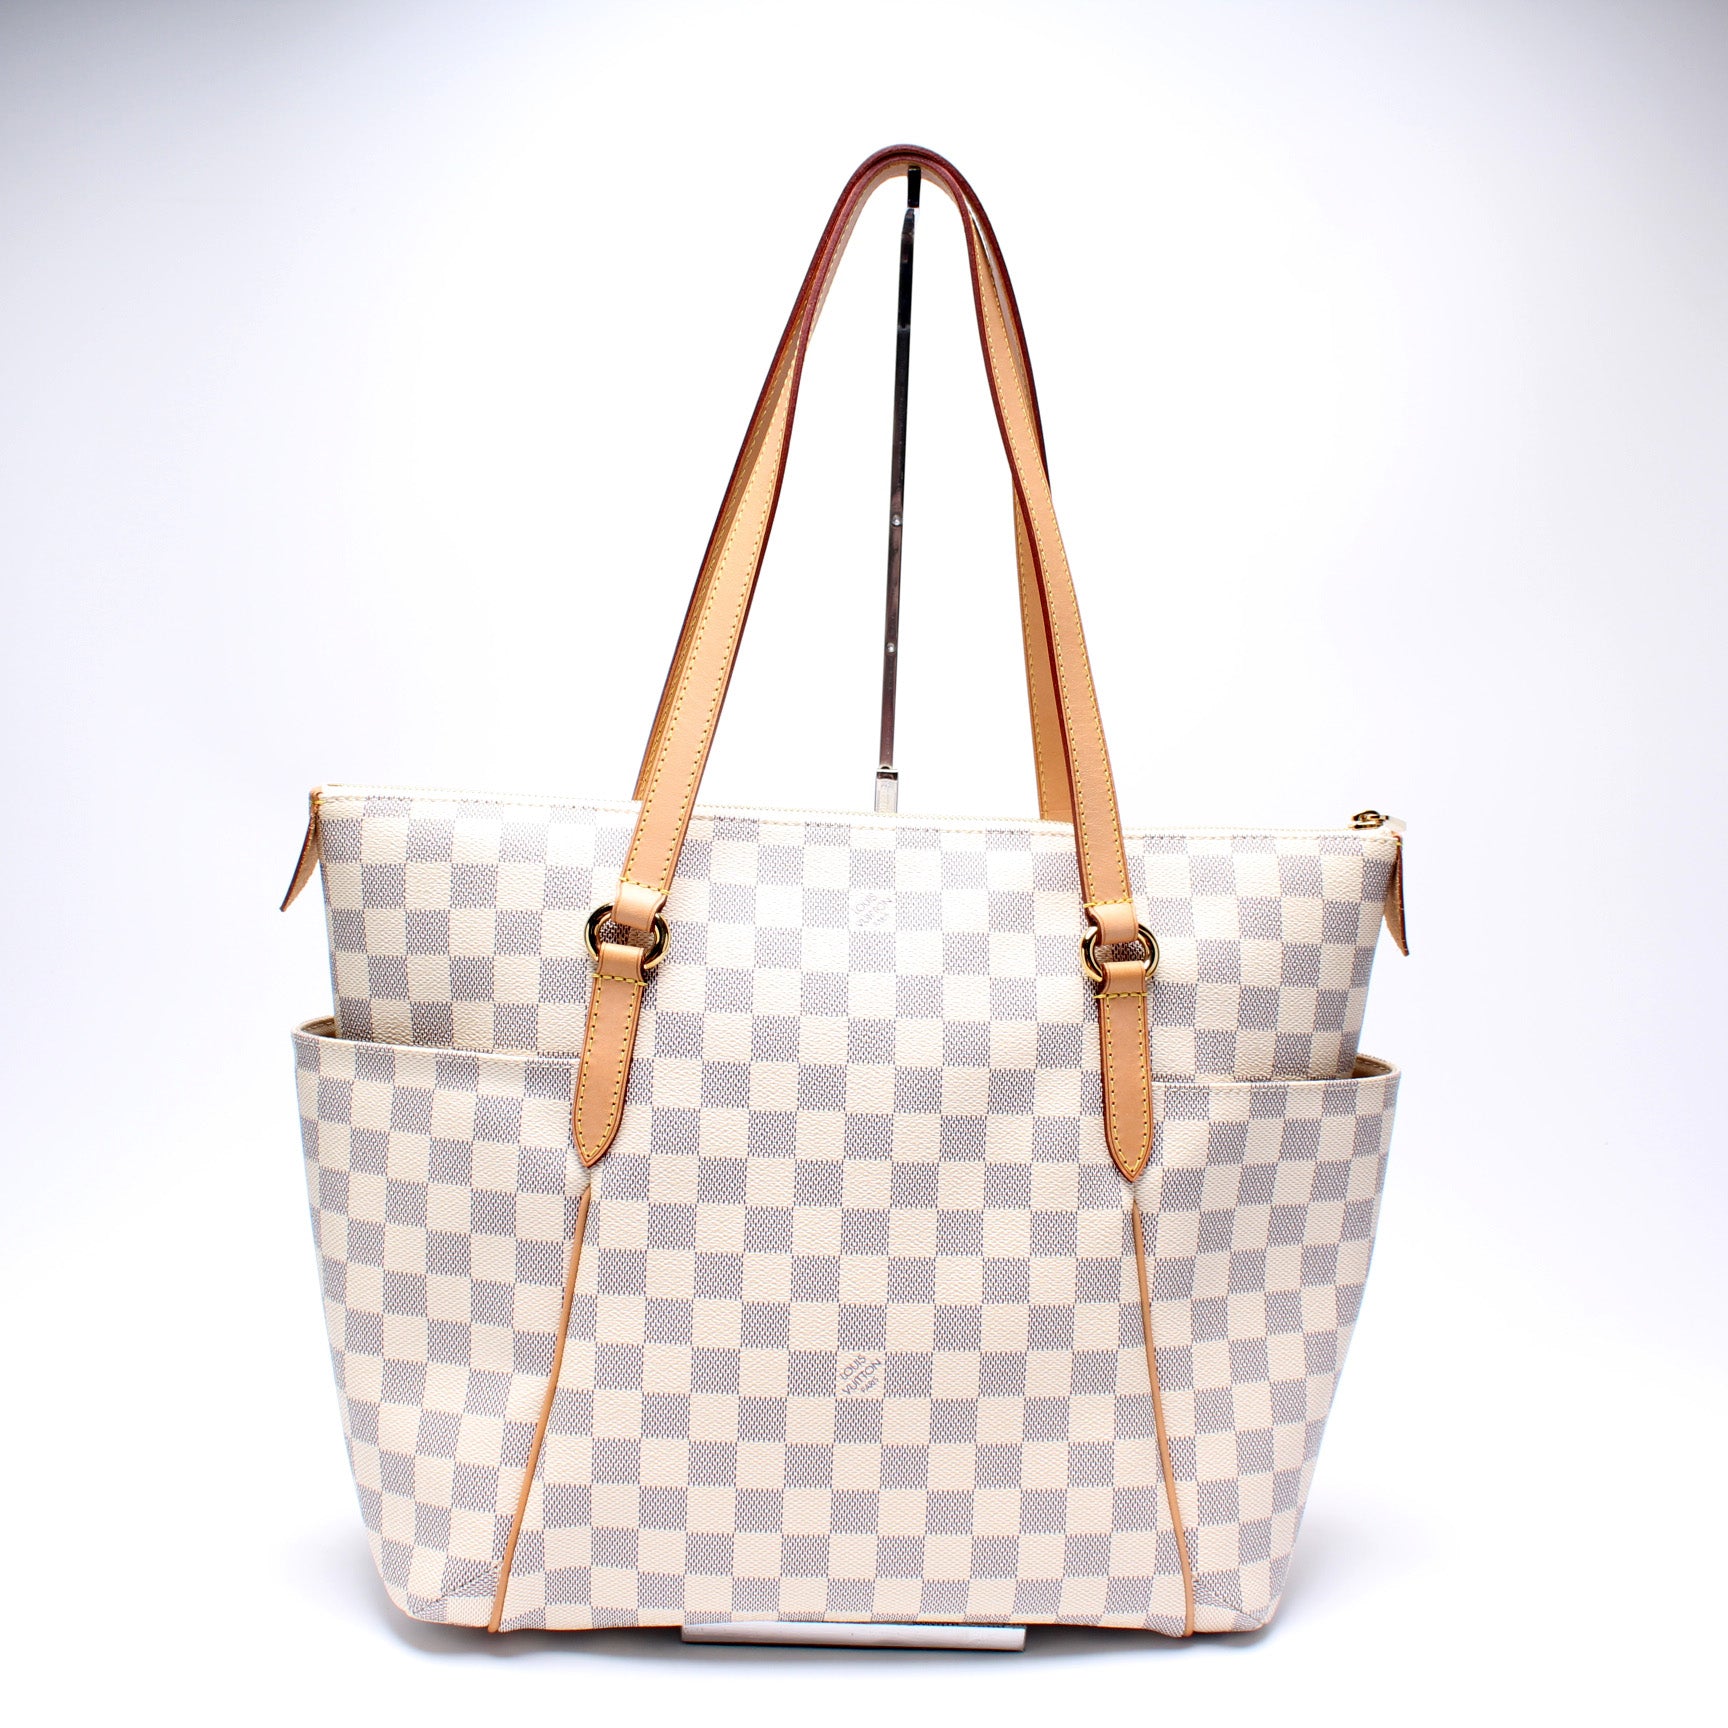 Louis Vuitton Pre-Owned White Totally MM Damier Azur Tote